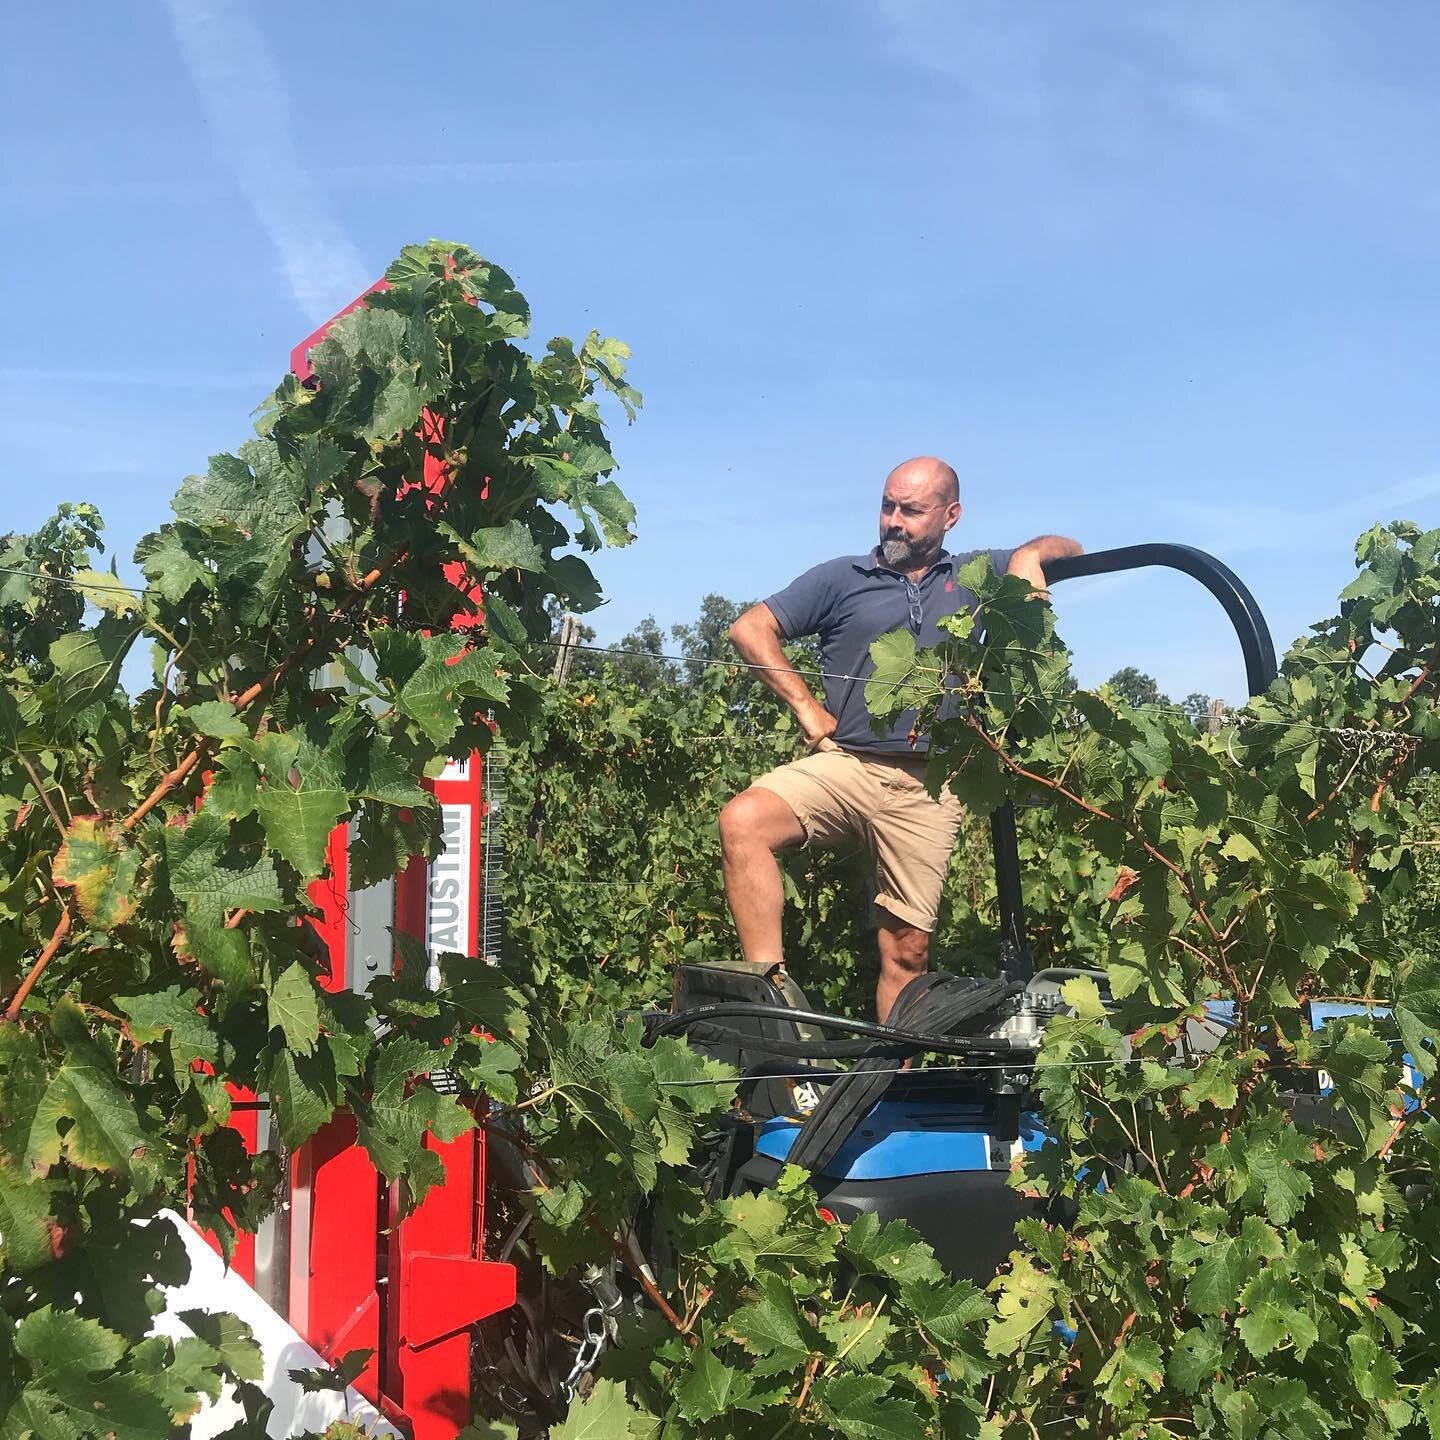 Just the beginning of the 2020 harvest! Beautiful fruit and weather to start the 40th harvest for @giulio.armani at La Stoppa! 

#softopening #lastoppa #vendemmia2020